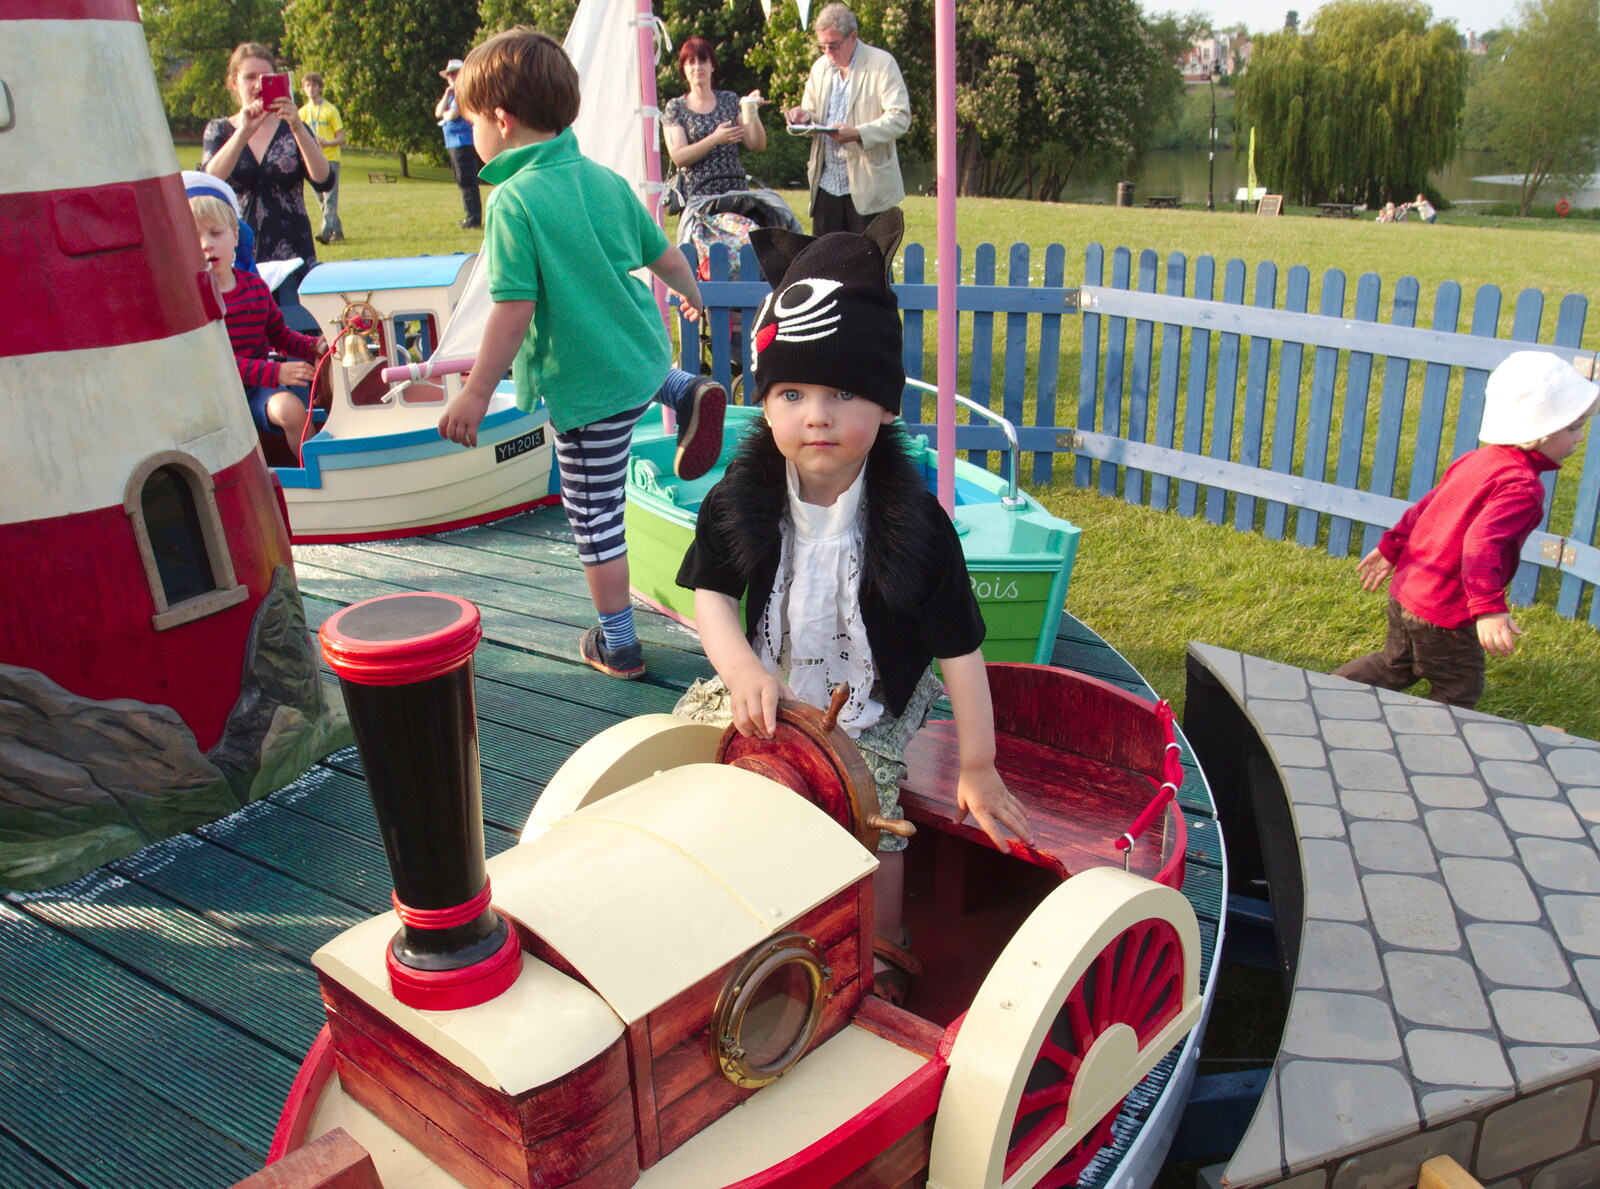 Harry's on a roundabout from A Family Fun Day on the Park, Diss, Norfolk - 16th May 2014